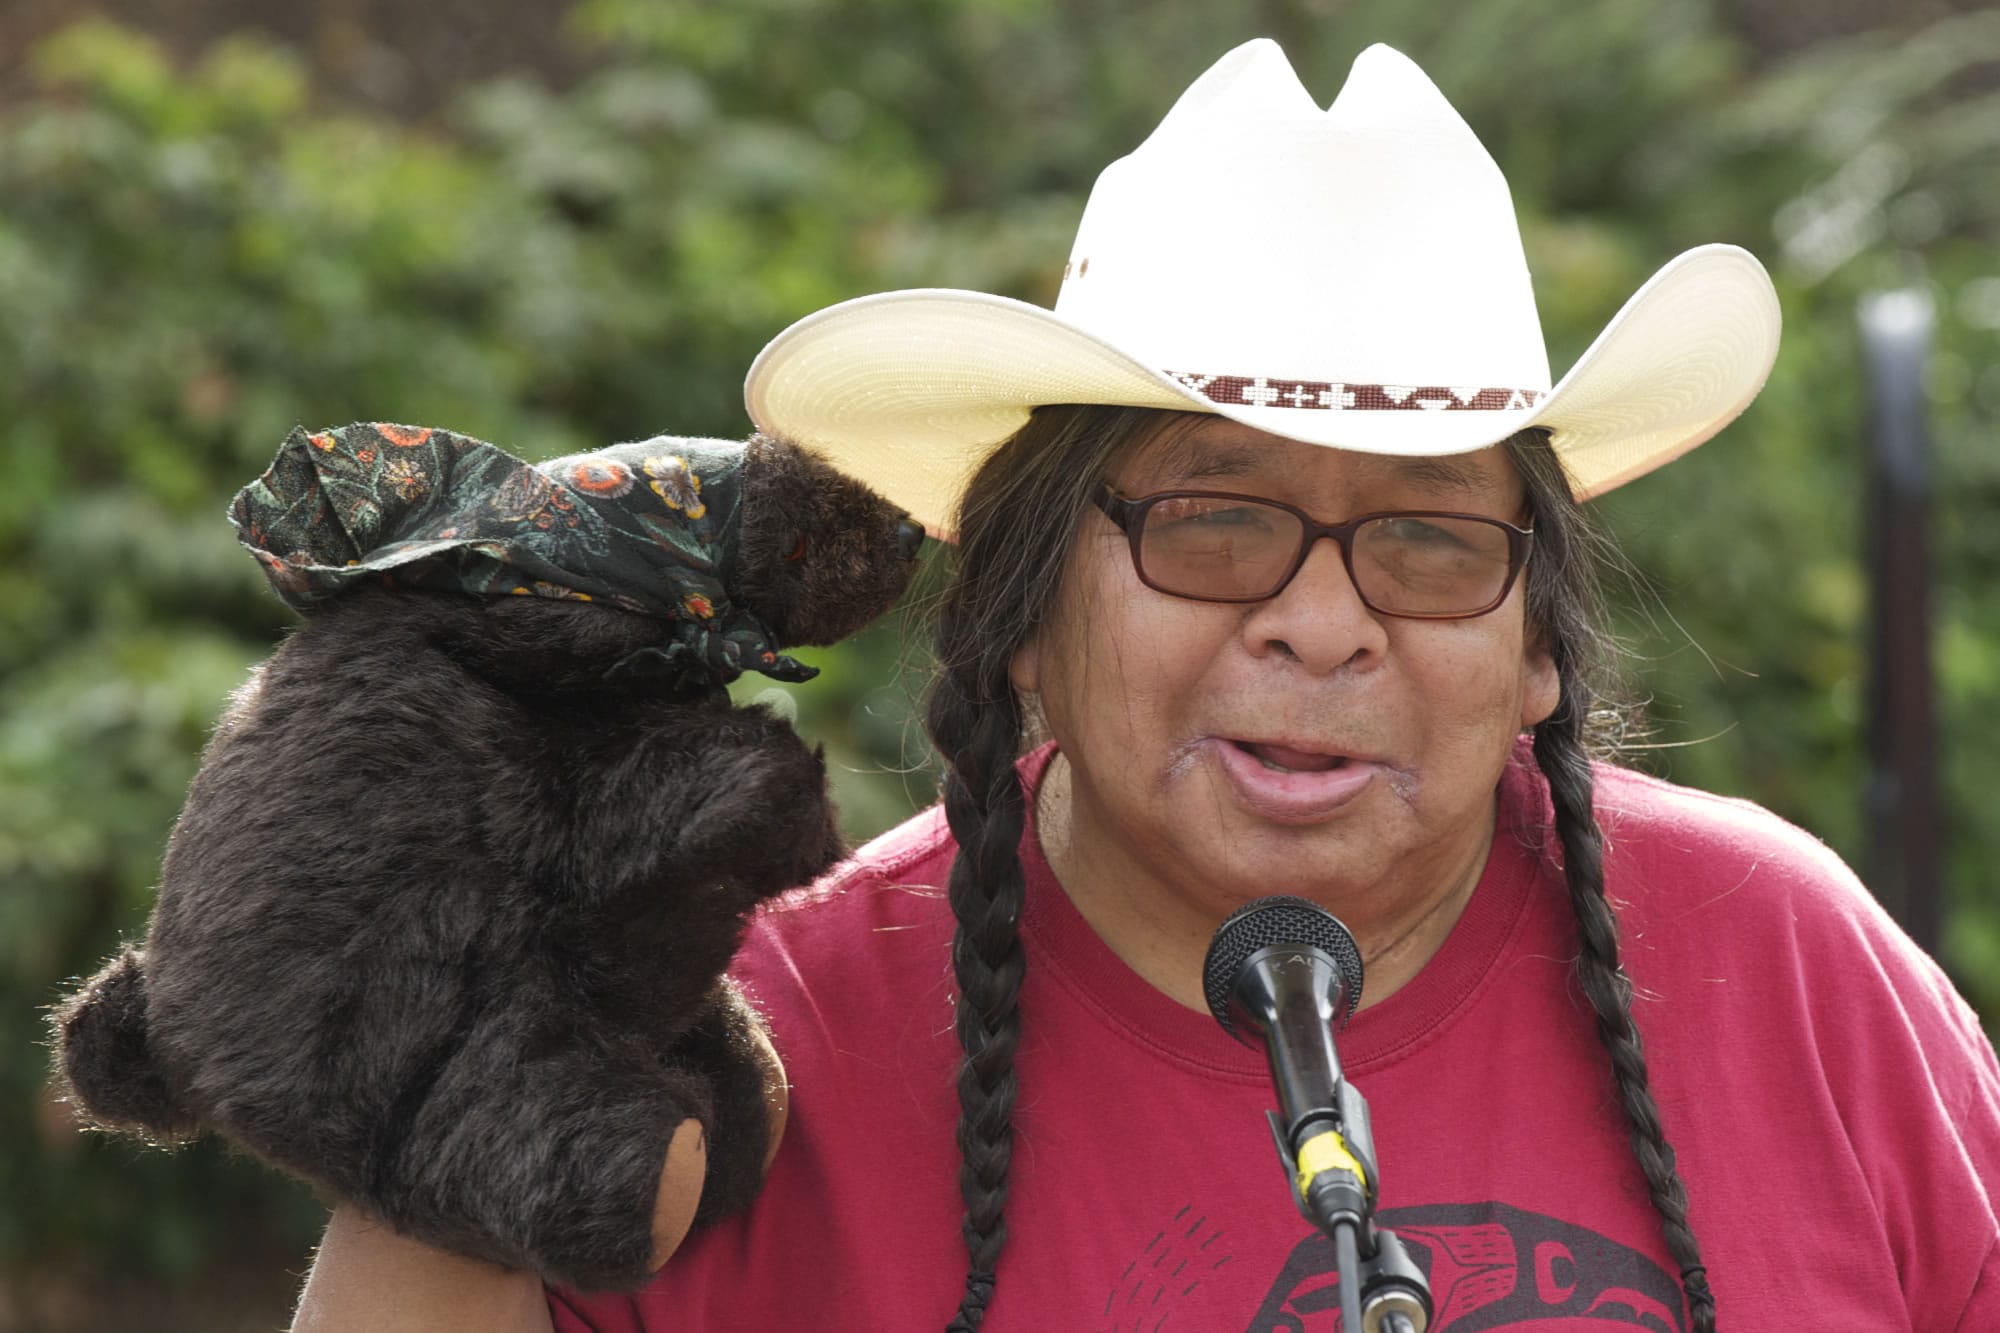 With help from his Grandmother Bear puppet, traditional storyteller Ed Edmo entertains and educates the crowd with American Indian legends at the Vancouver Land Bridge fifth anniversary celebration on Saturday morning.